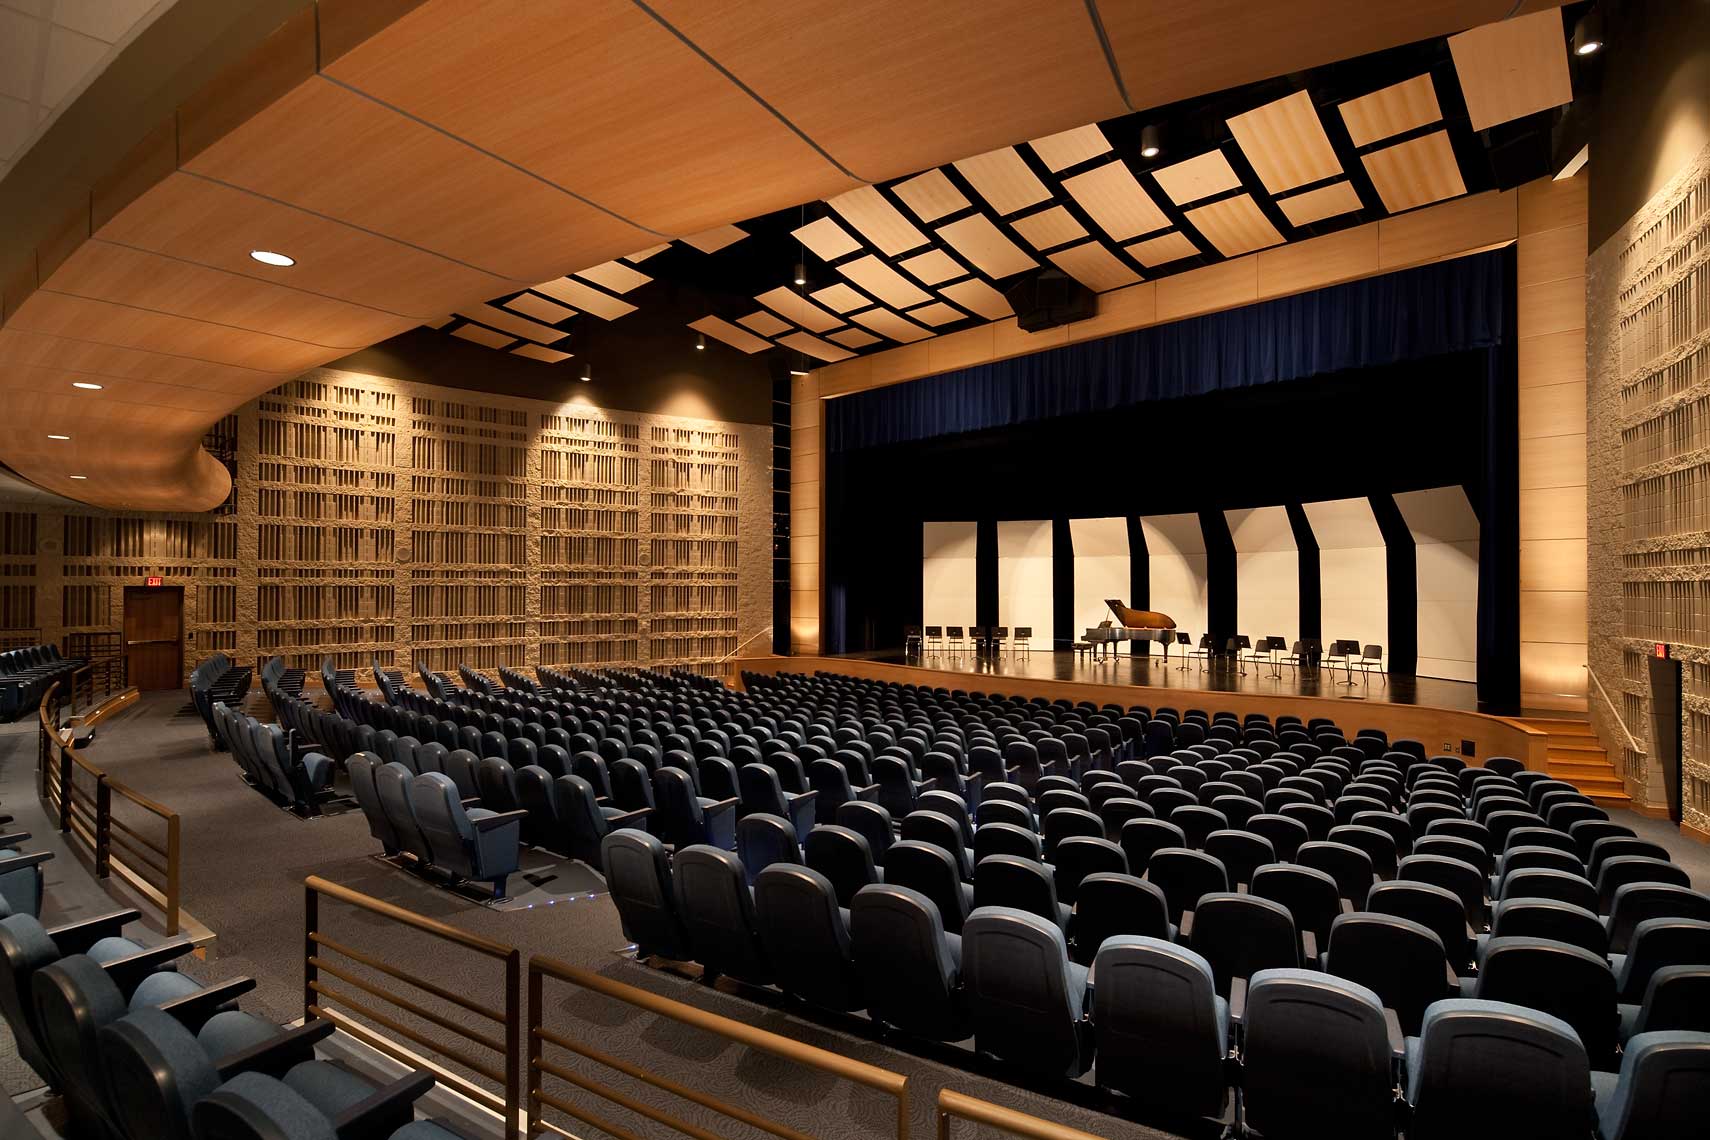 A view of the sumptuous Performance Center at the Byrnes Fine Arts Center in Spartanburg, SC